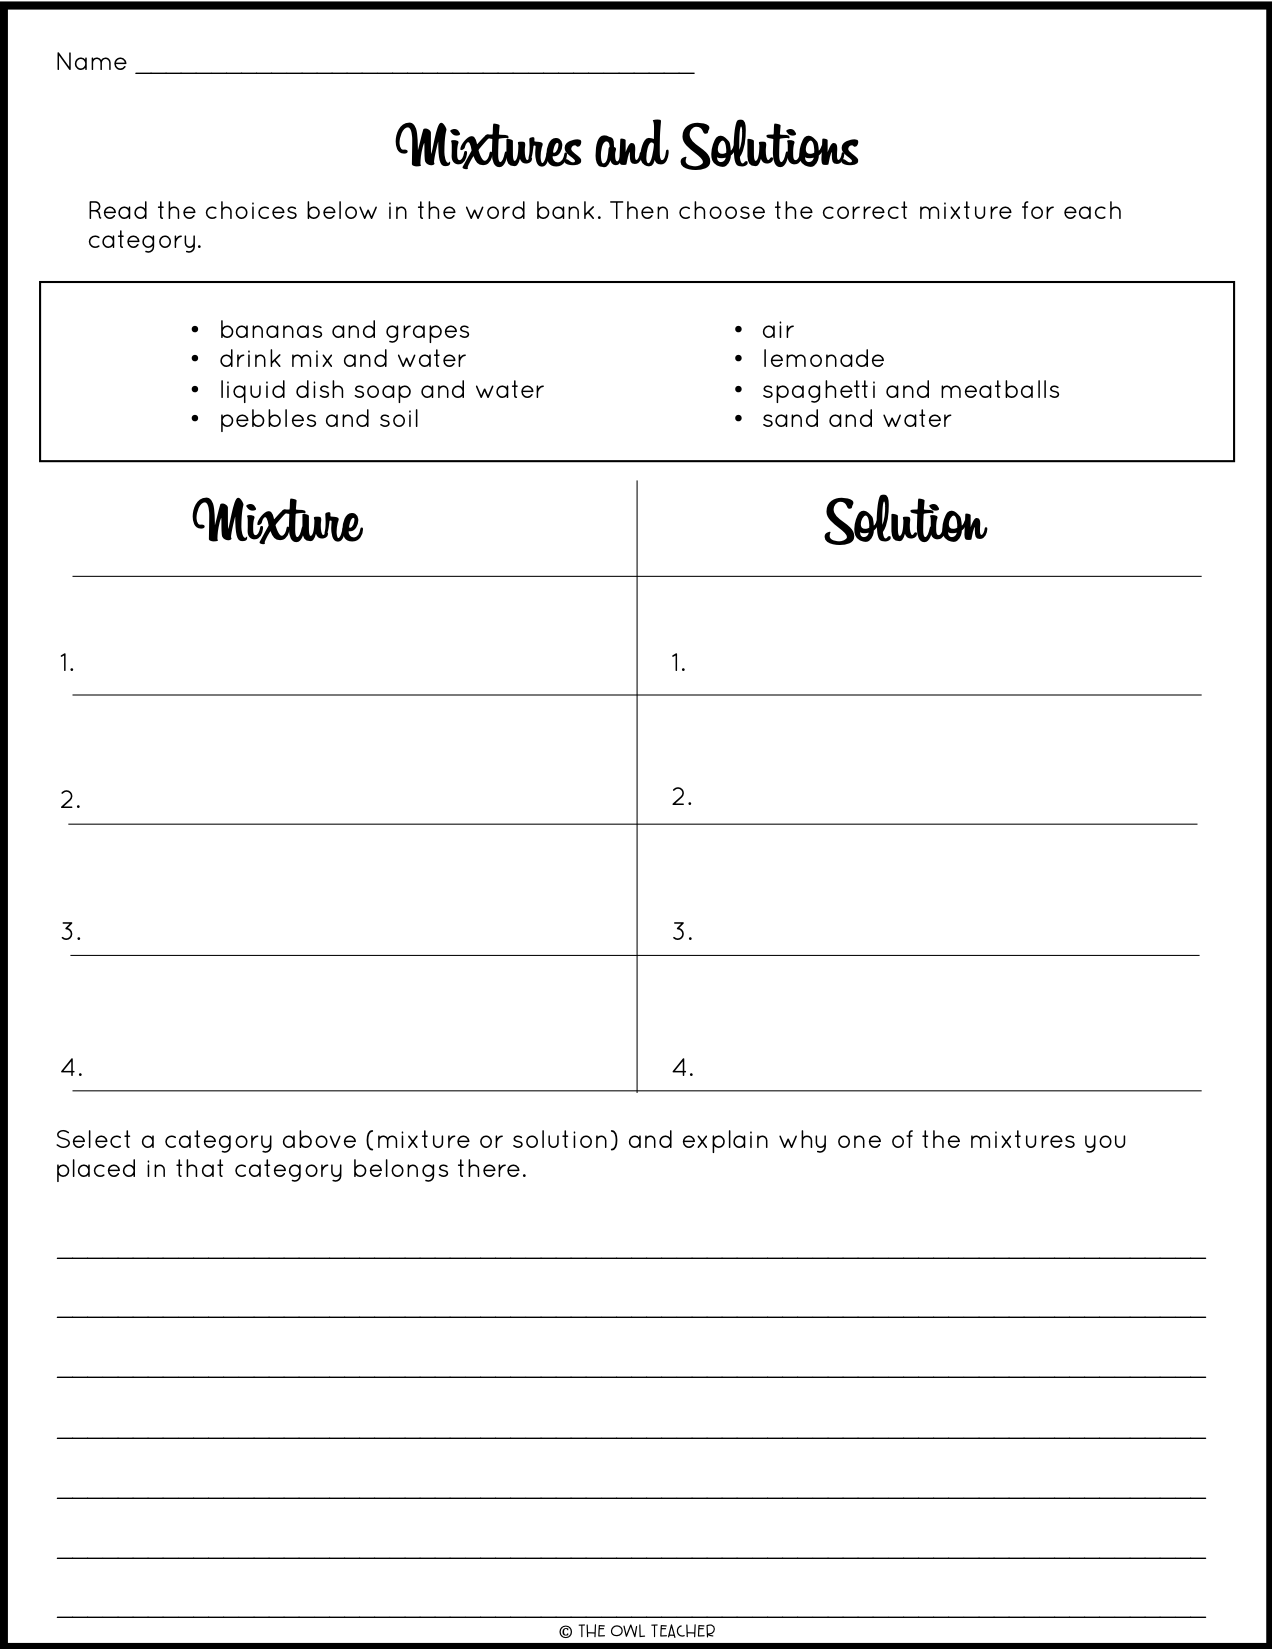 Mixtures and Solutions Craftivity - The Owl Teacher In Mixtures And Solutions Worksheet Answers